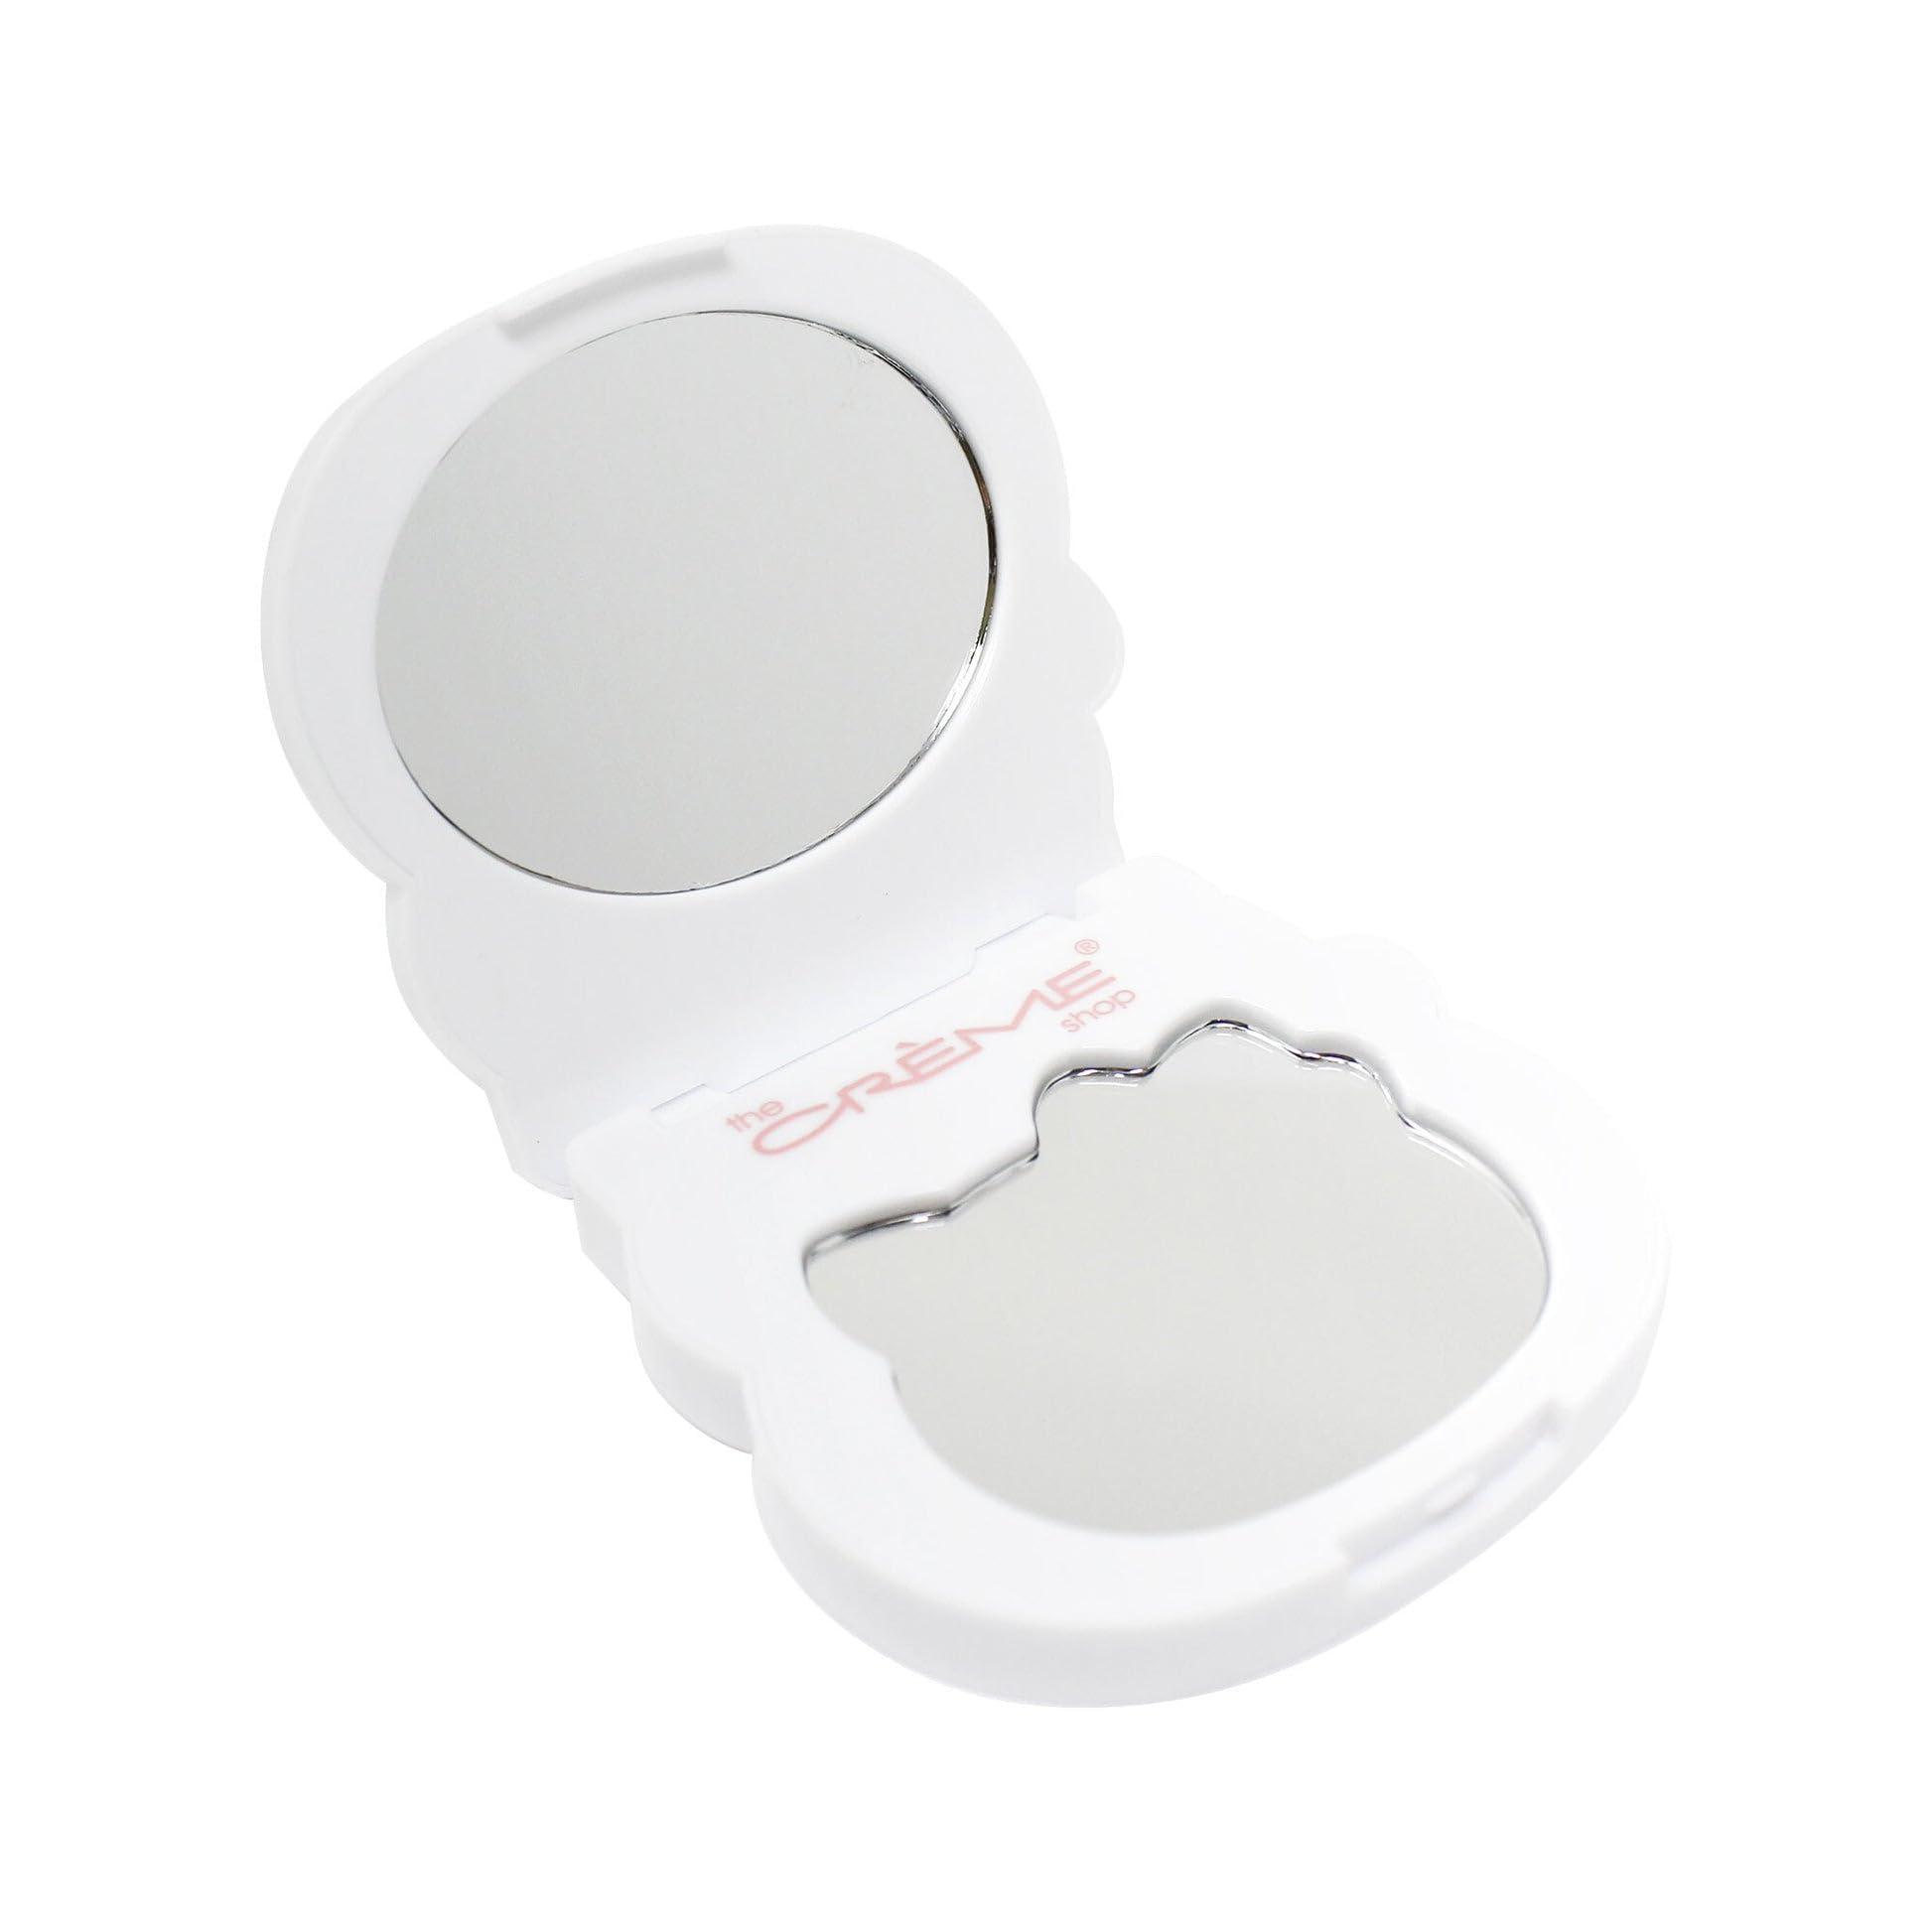 The Creme Shop Hello Kitty On-The-Go Compact Mirror Dual-Sided HD Mirrors with 1x and 2x Magnification, Perfect Travel Size for Touch-Ups from Every Angle, Fits in Bag or Palm, Cute Hello Kitty Design